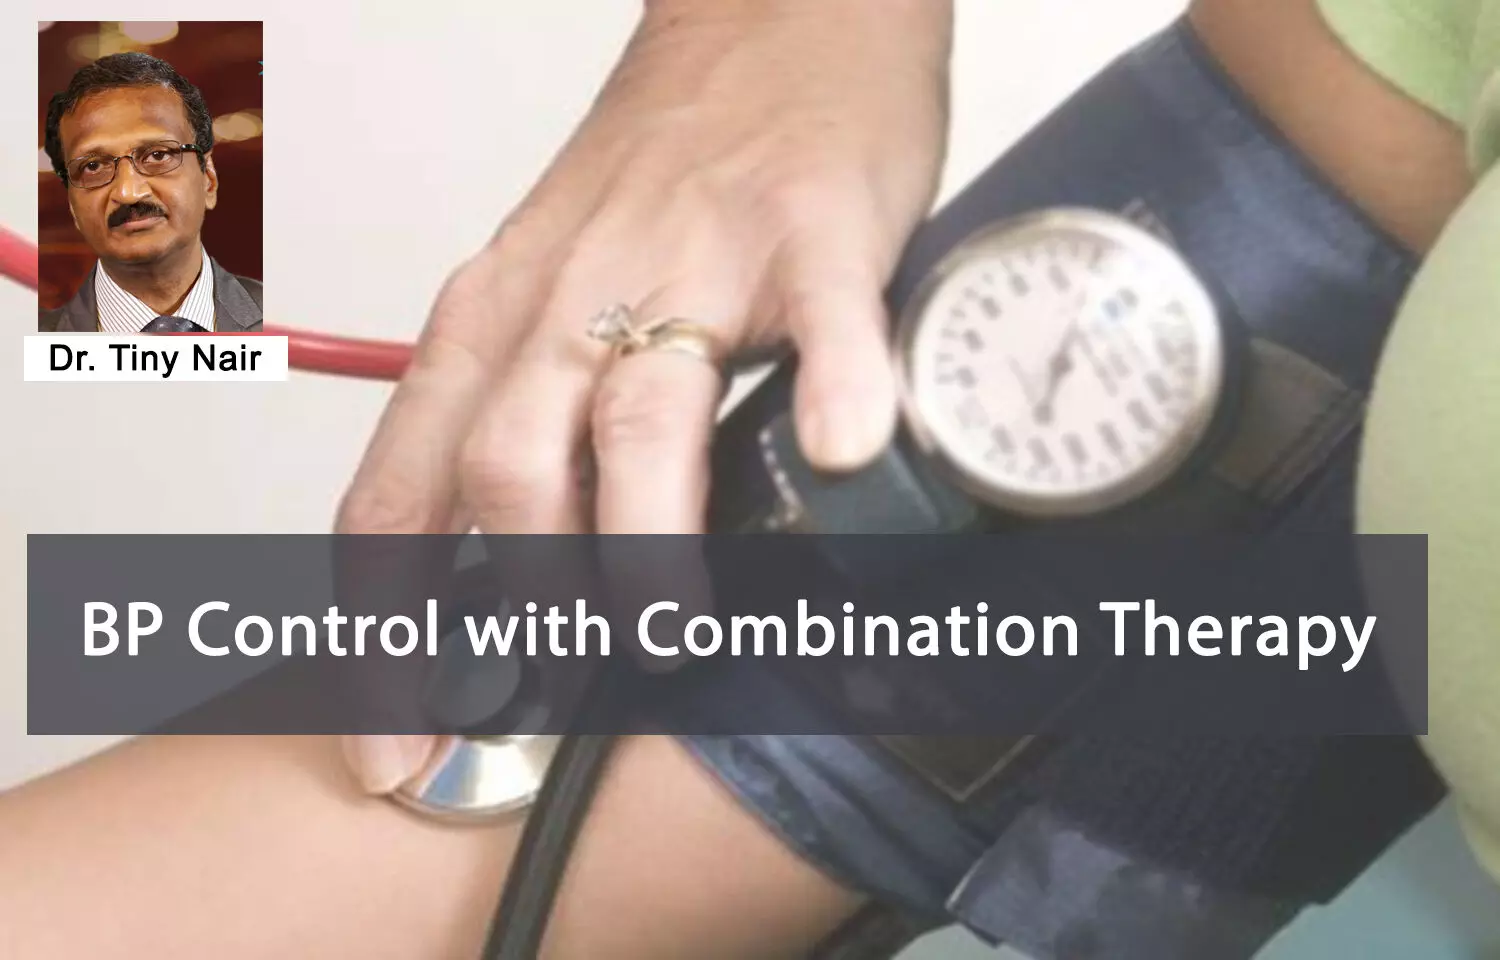 Prompt BP Control with an Early Combination Therapy: Role of a Fixed-Dose Combination of an ARB and a CCB